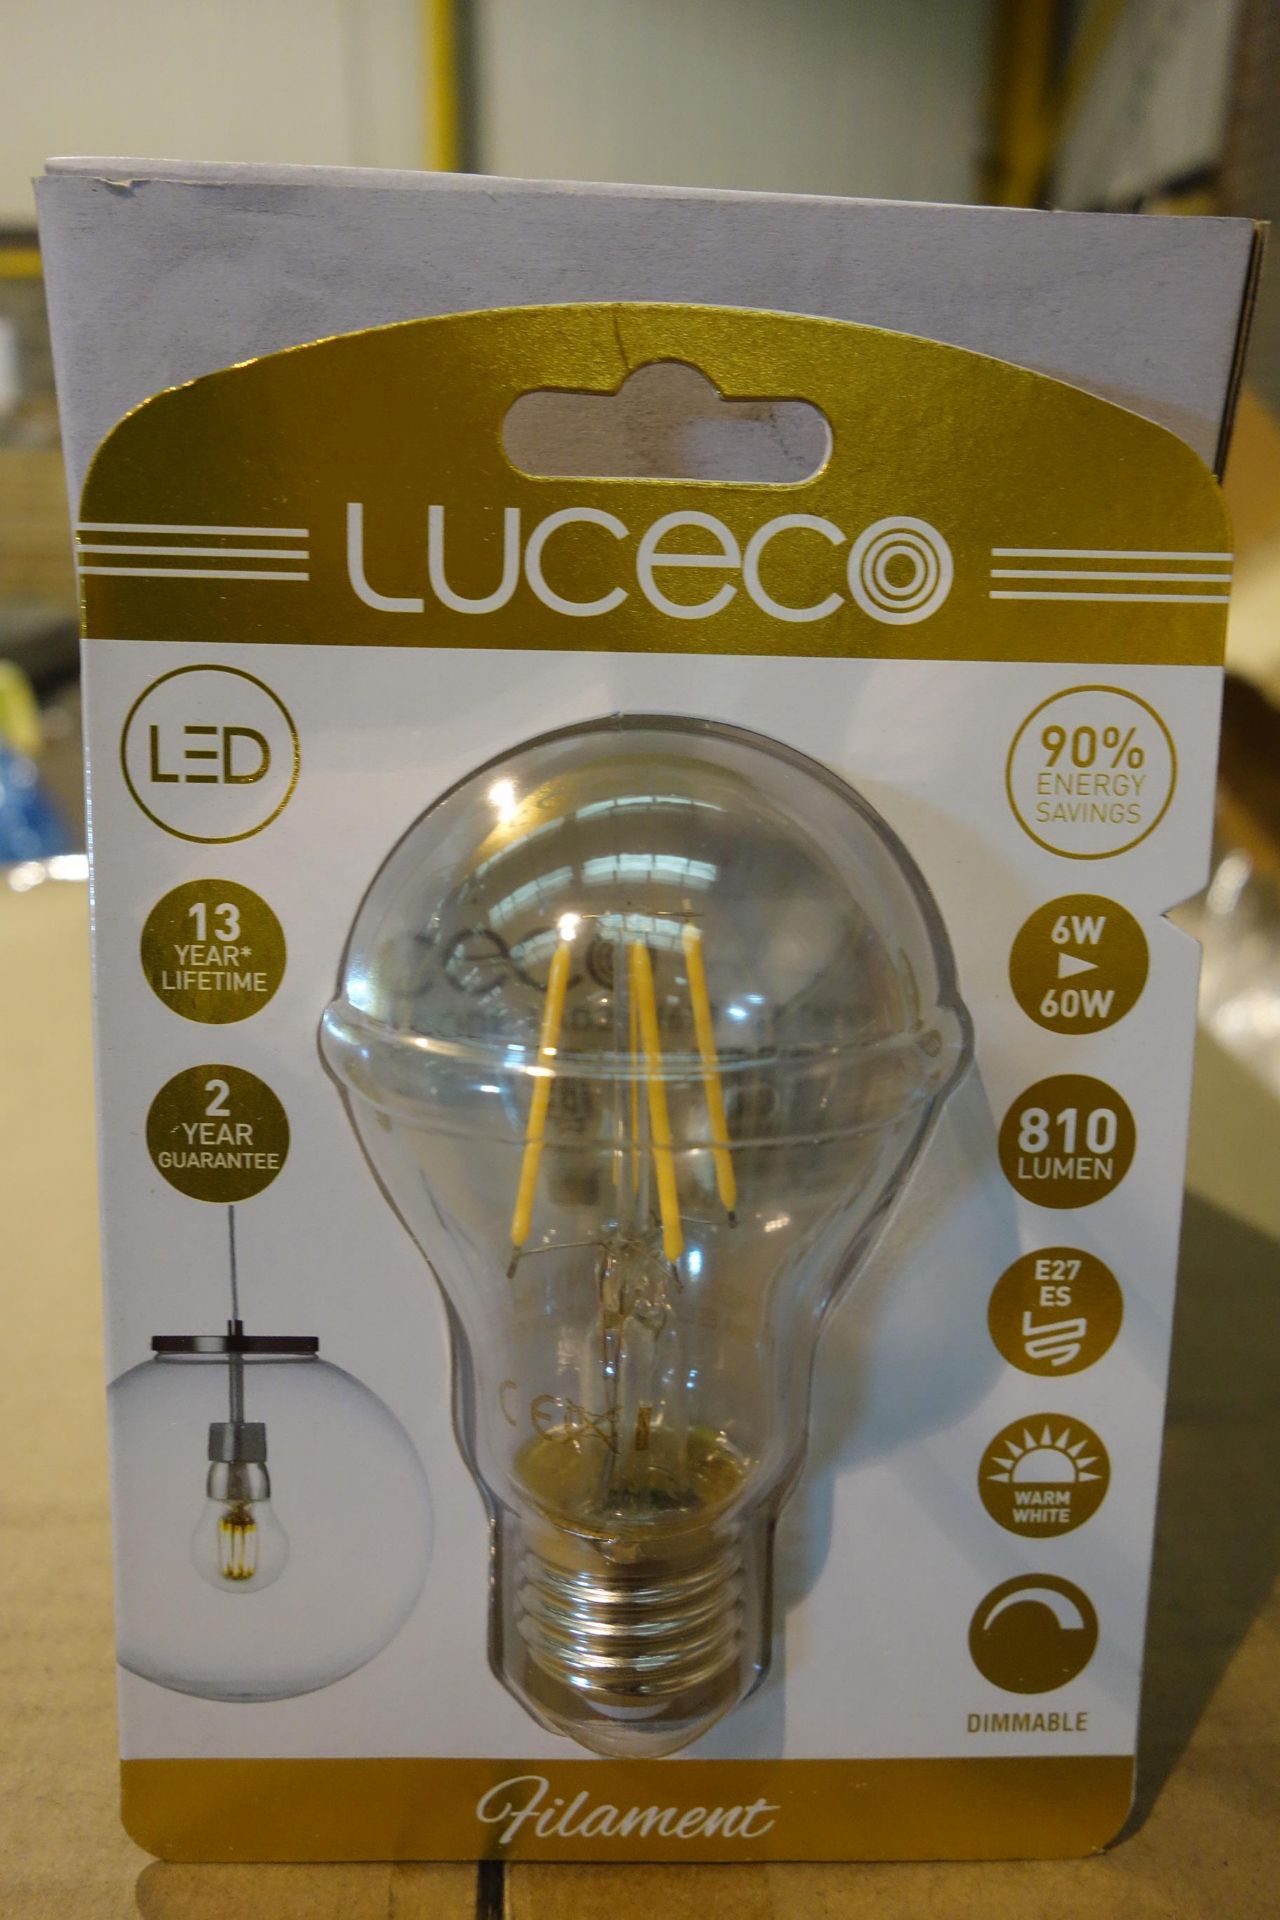 100 X Luceco LAD27W6F81-LE MK LED 6W 810 Lumen Filament Lamps Dimmable E27 Fitting